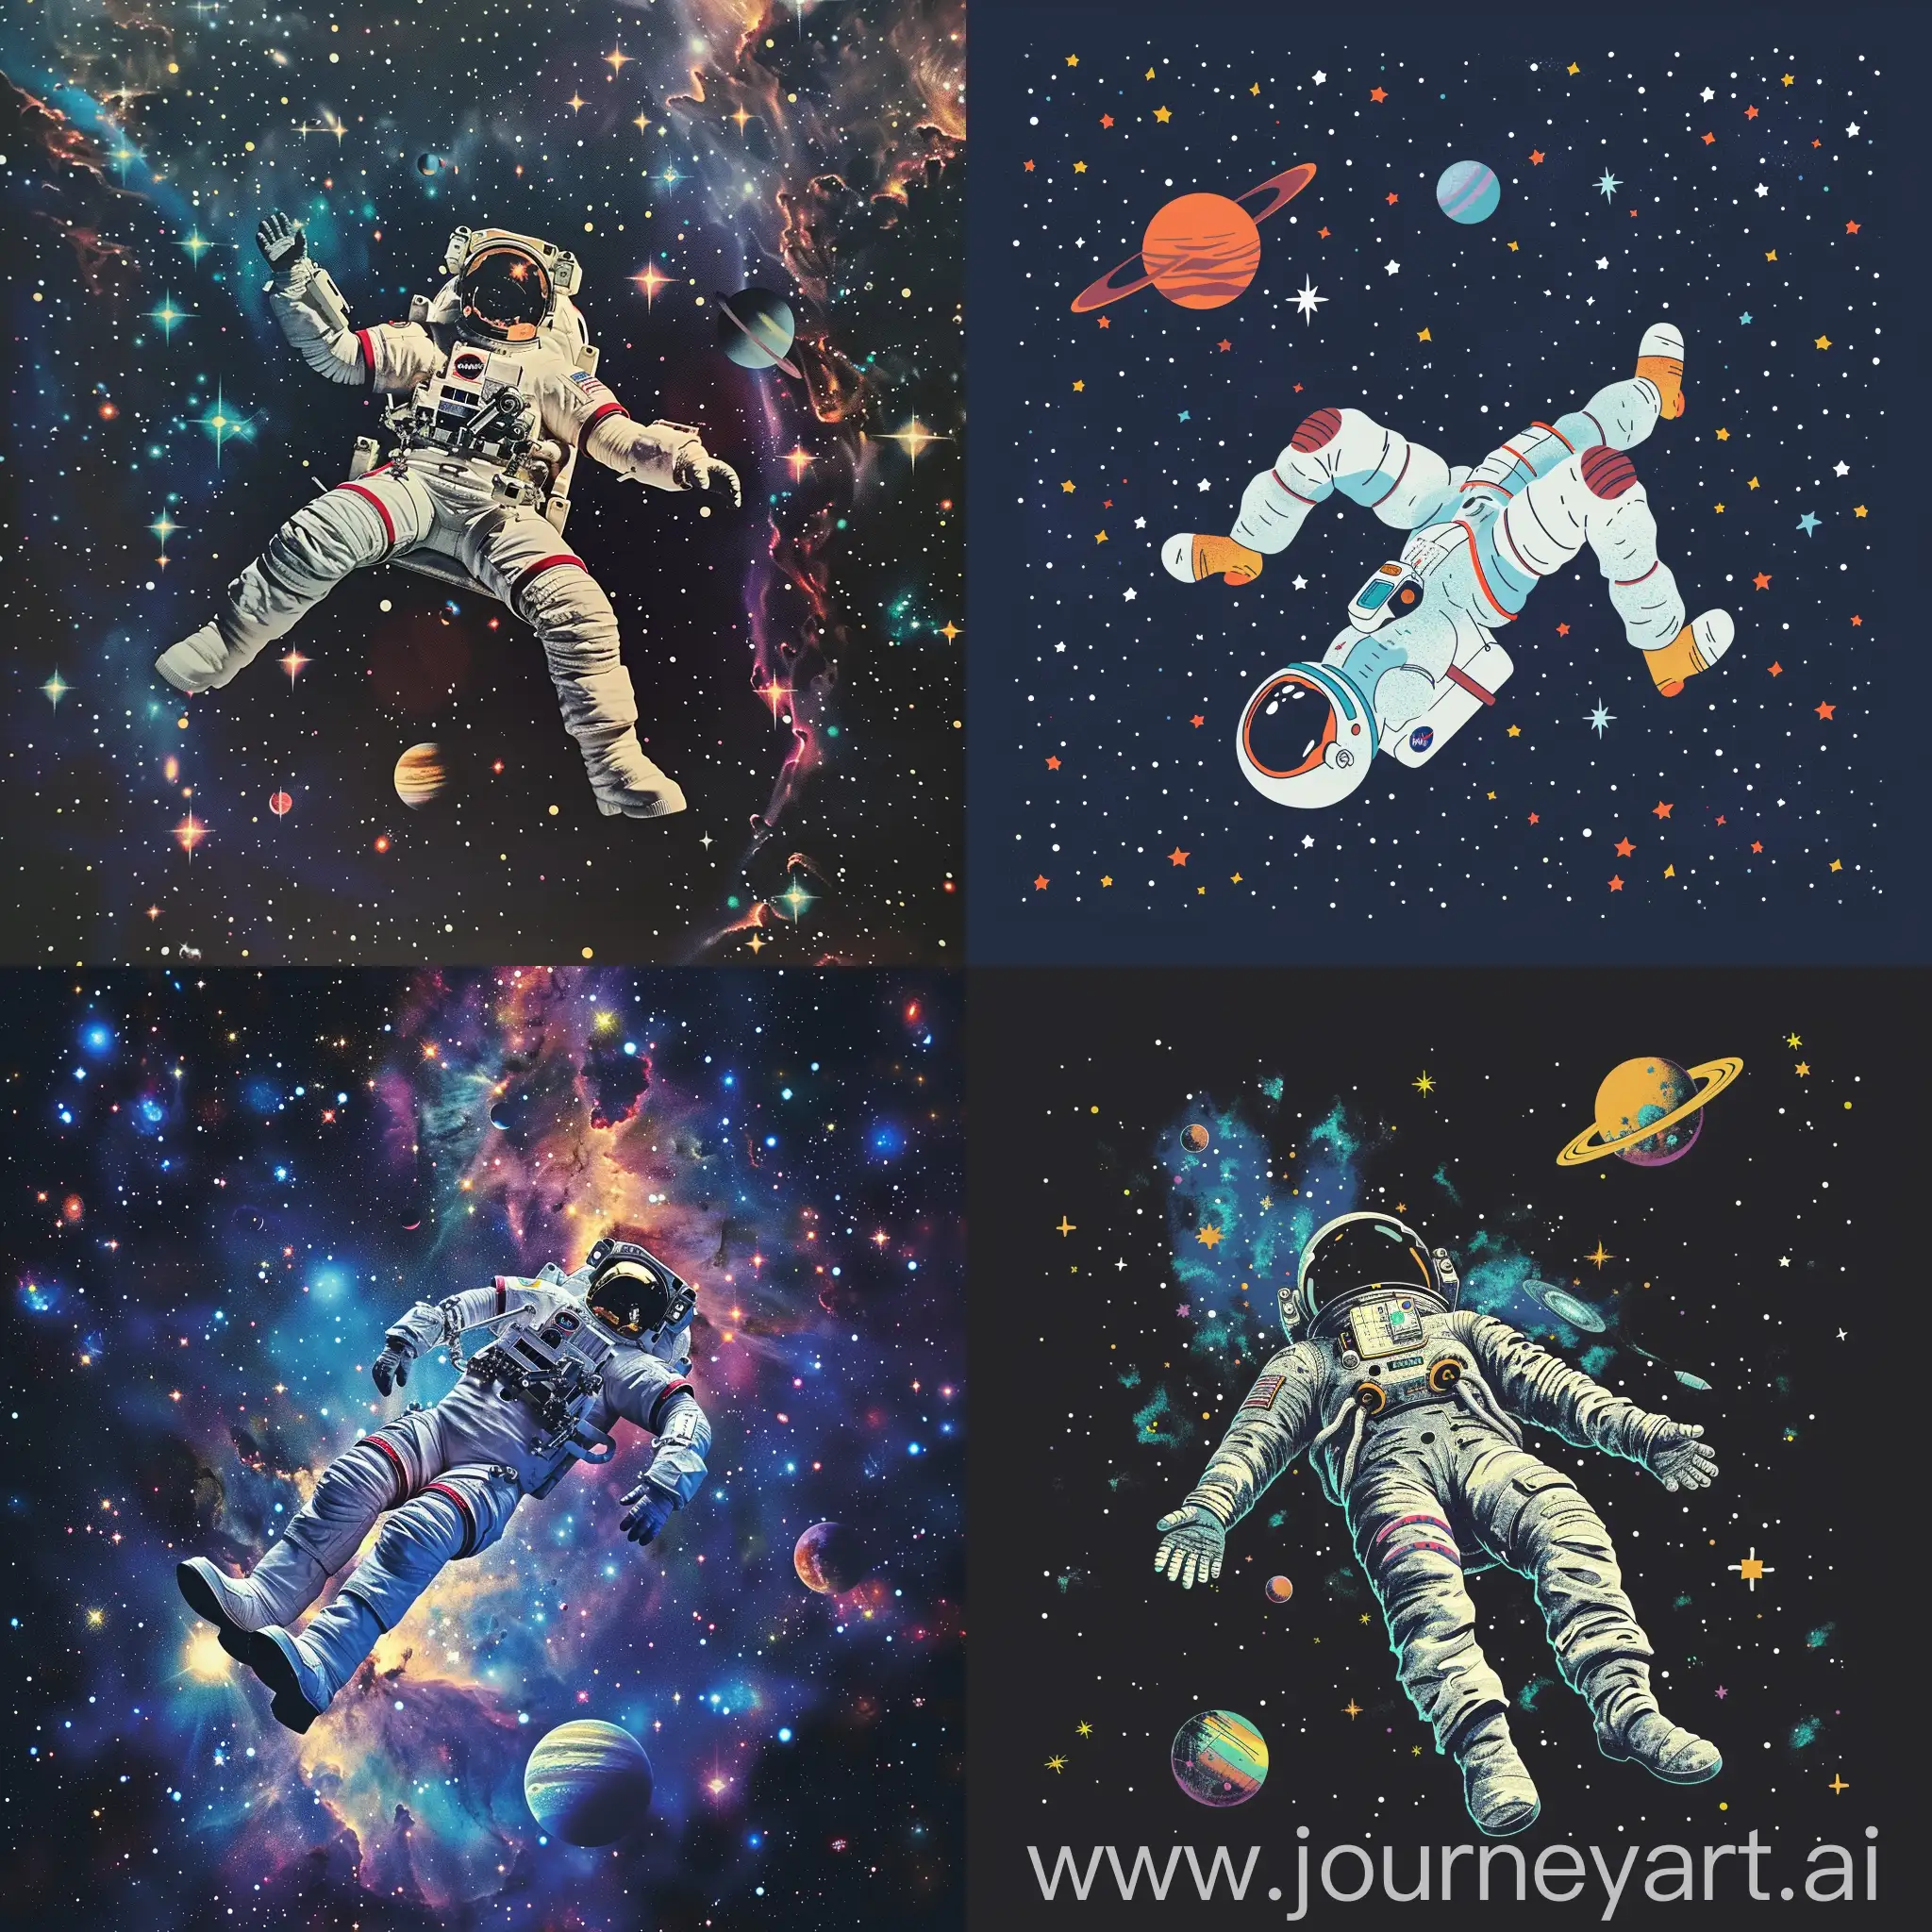 Brave-Astronaut-Floating-in-Space-Surrounded-by-Stars-and-Planets